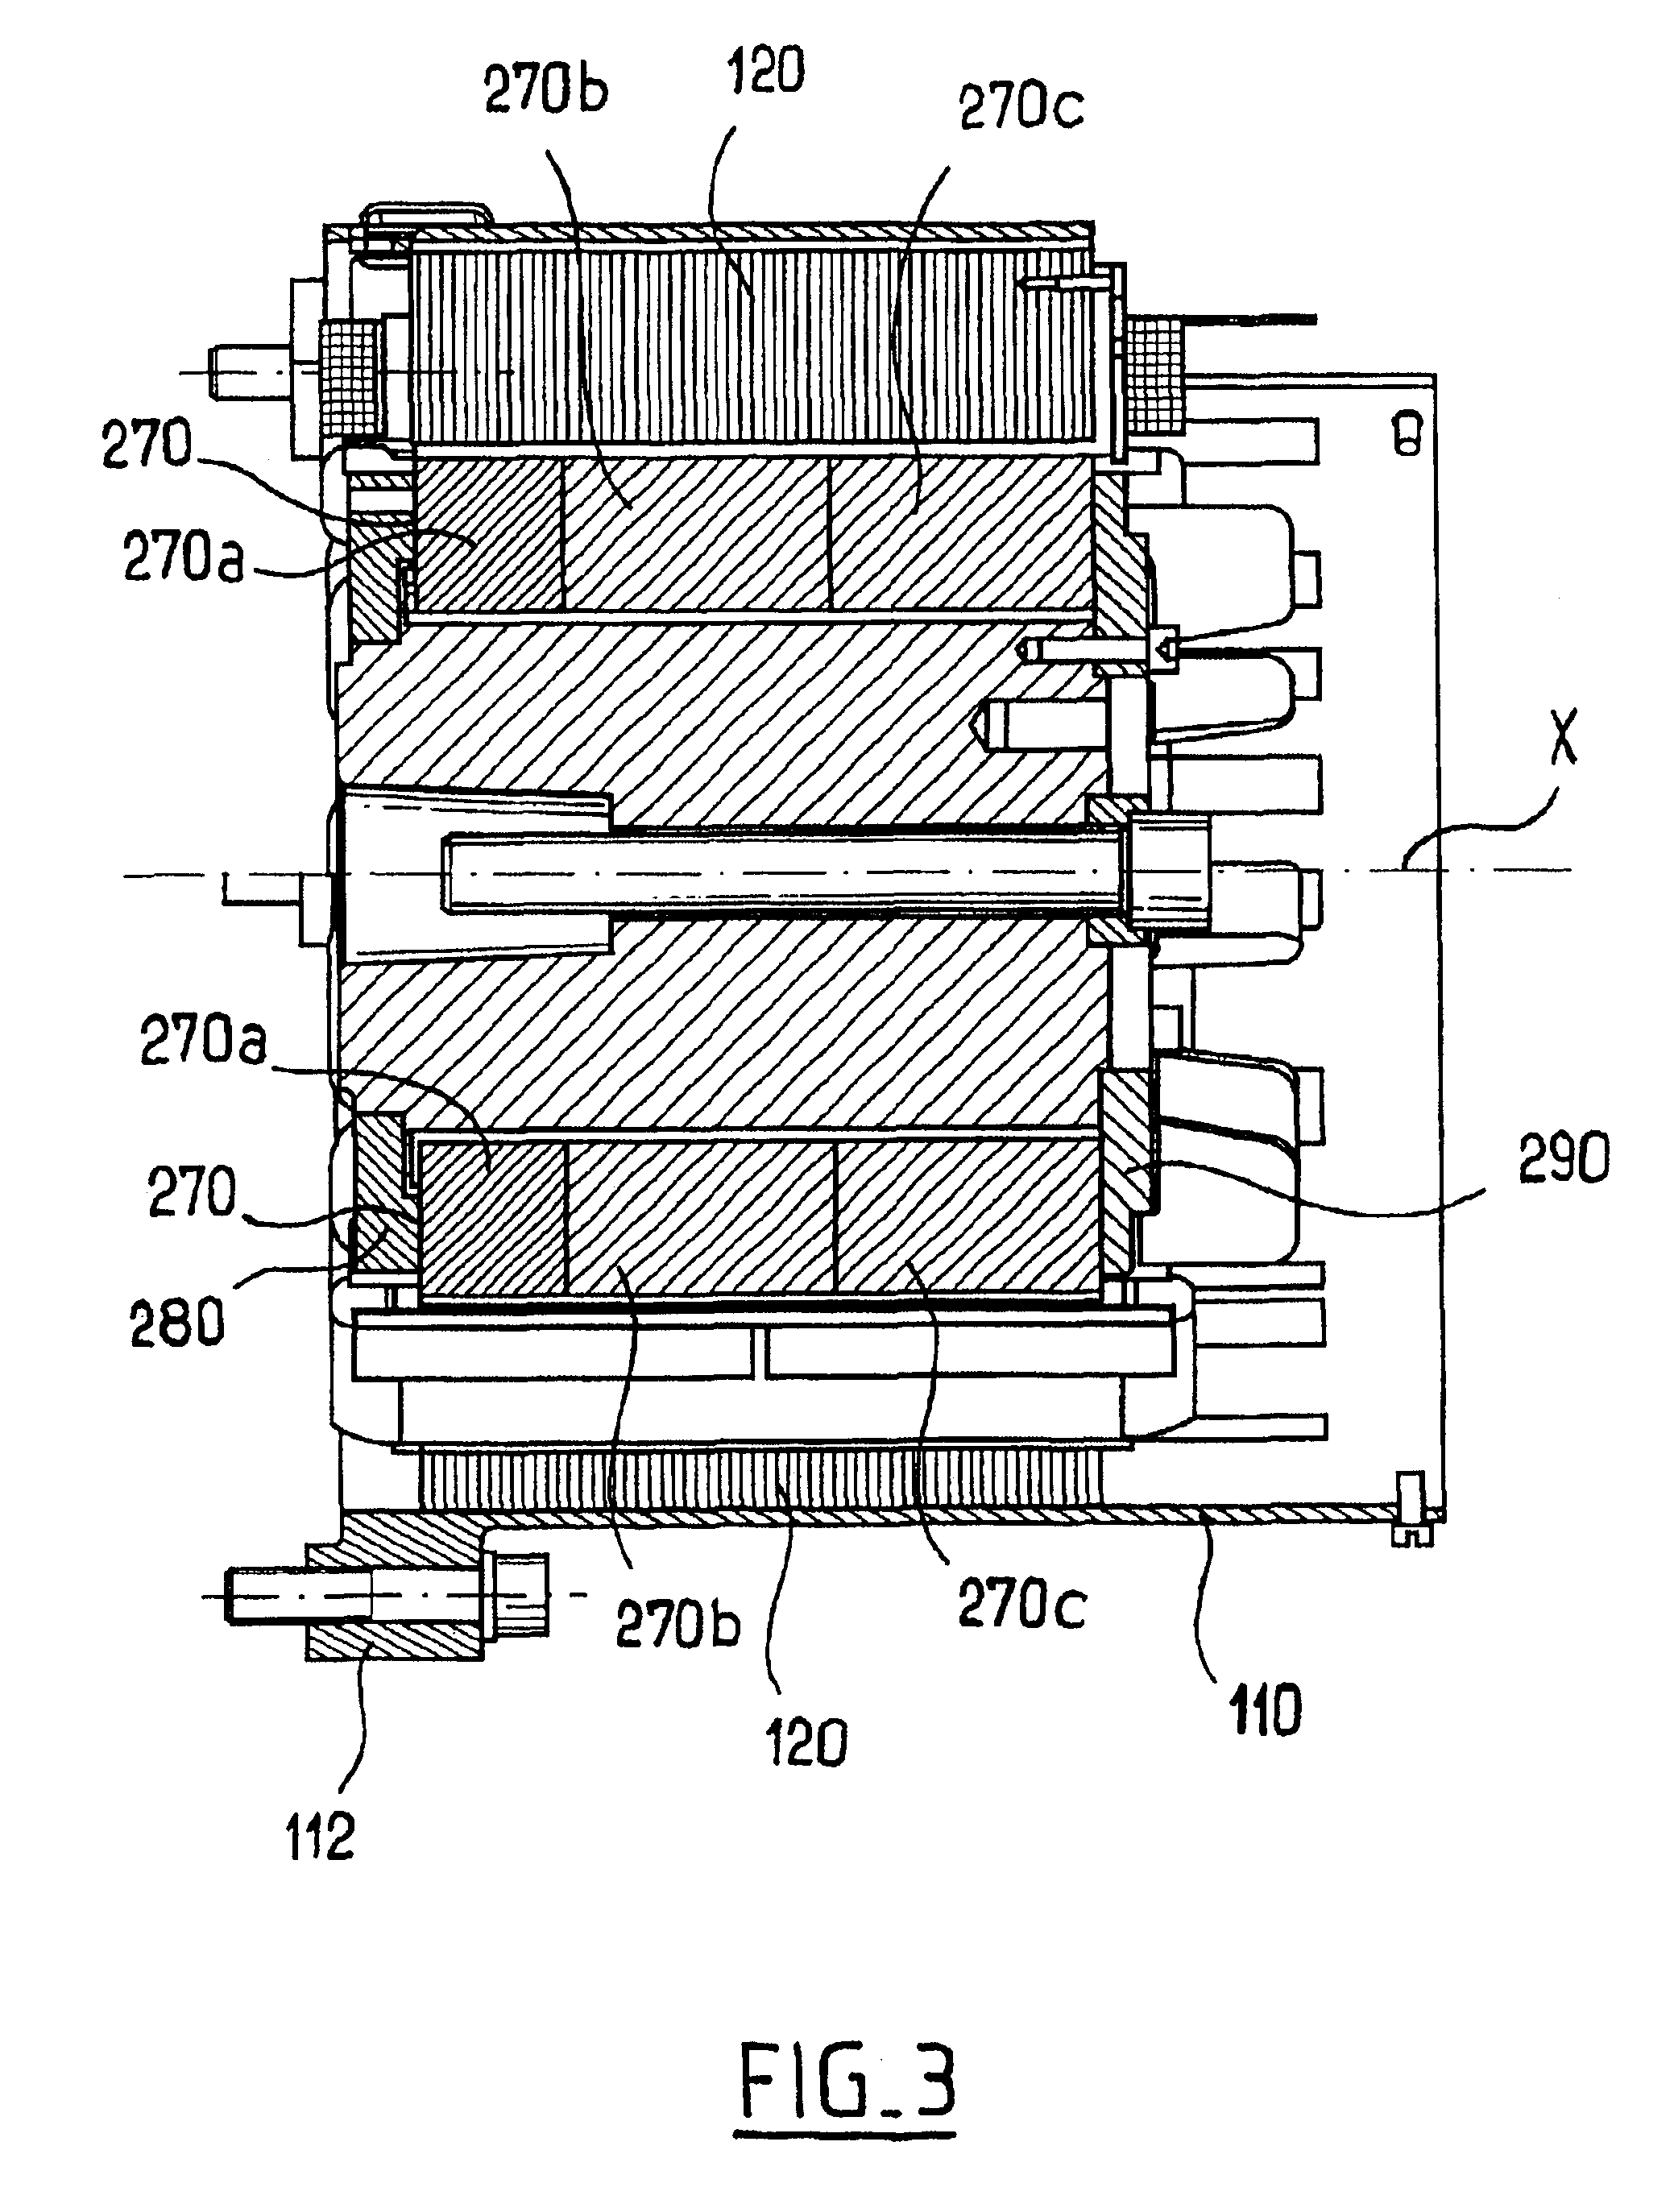 Rotary electric machine having a flux-concentrating rotor and a stator with windings on teeth